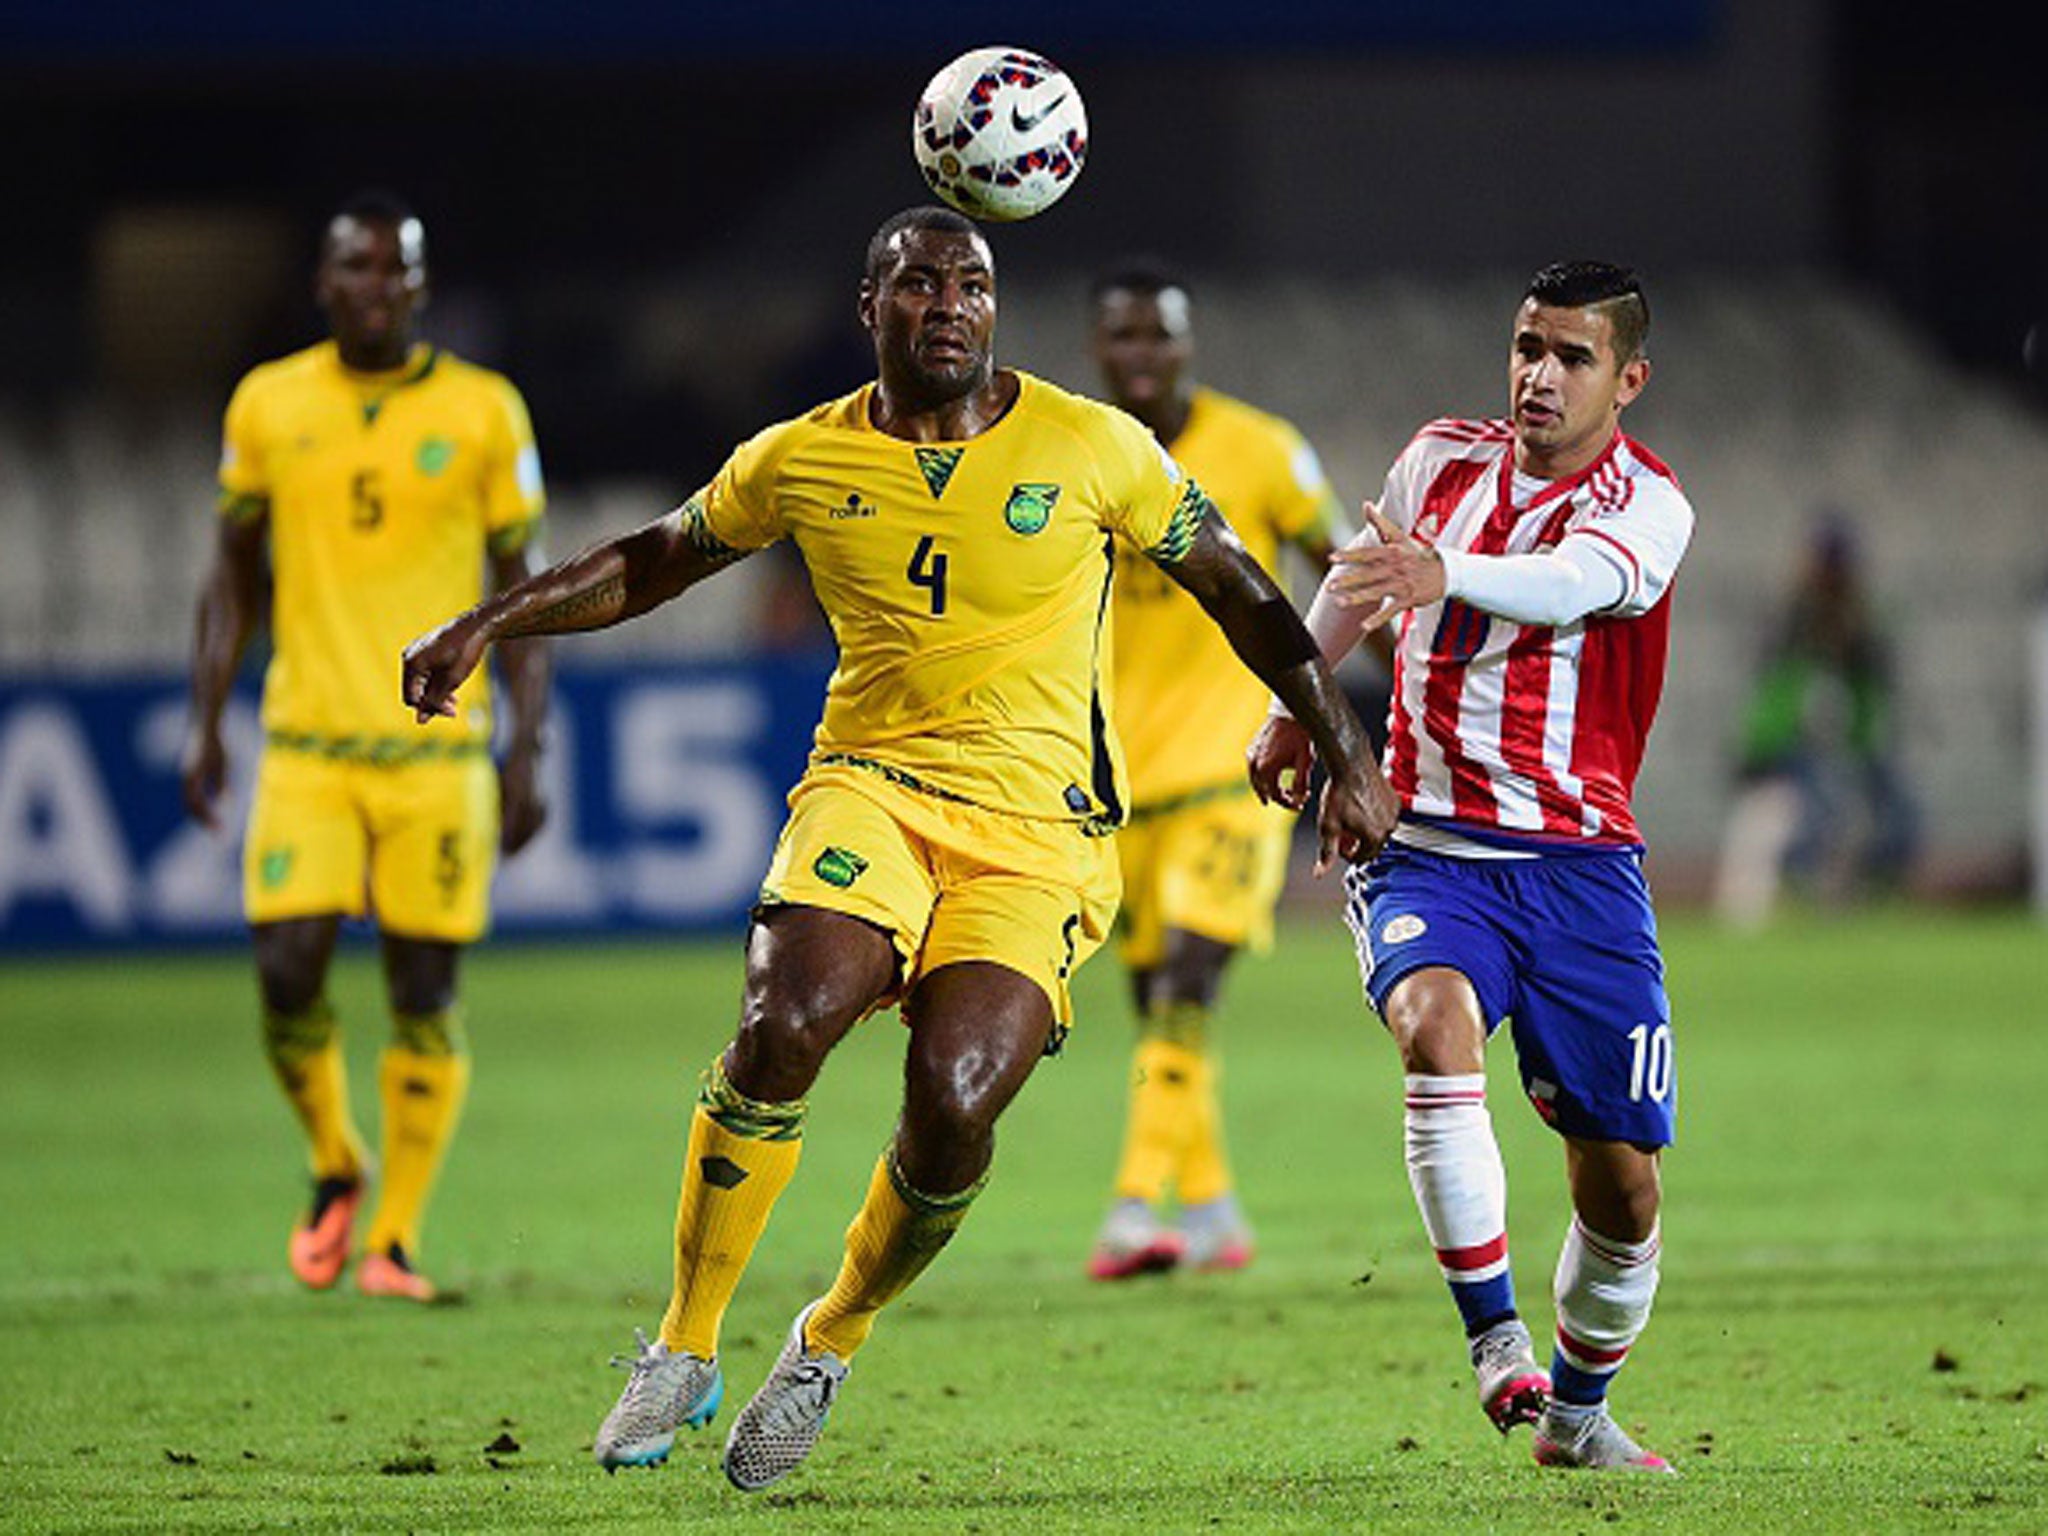 &#13;
Premier League winner Wes Morgan is part of the Jamaica squad for the tournament (Getty)&#13;